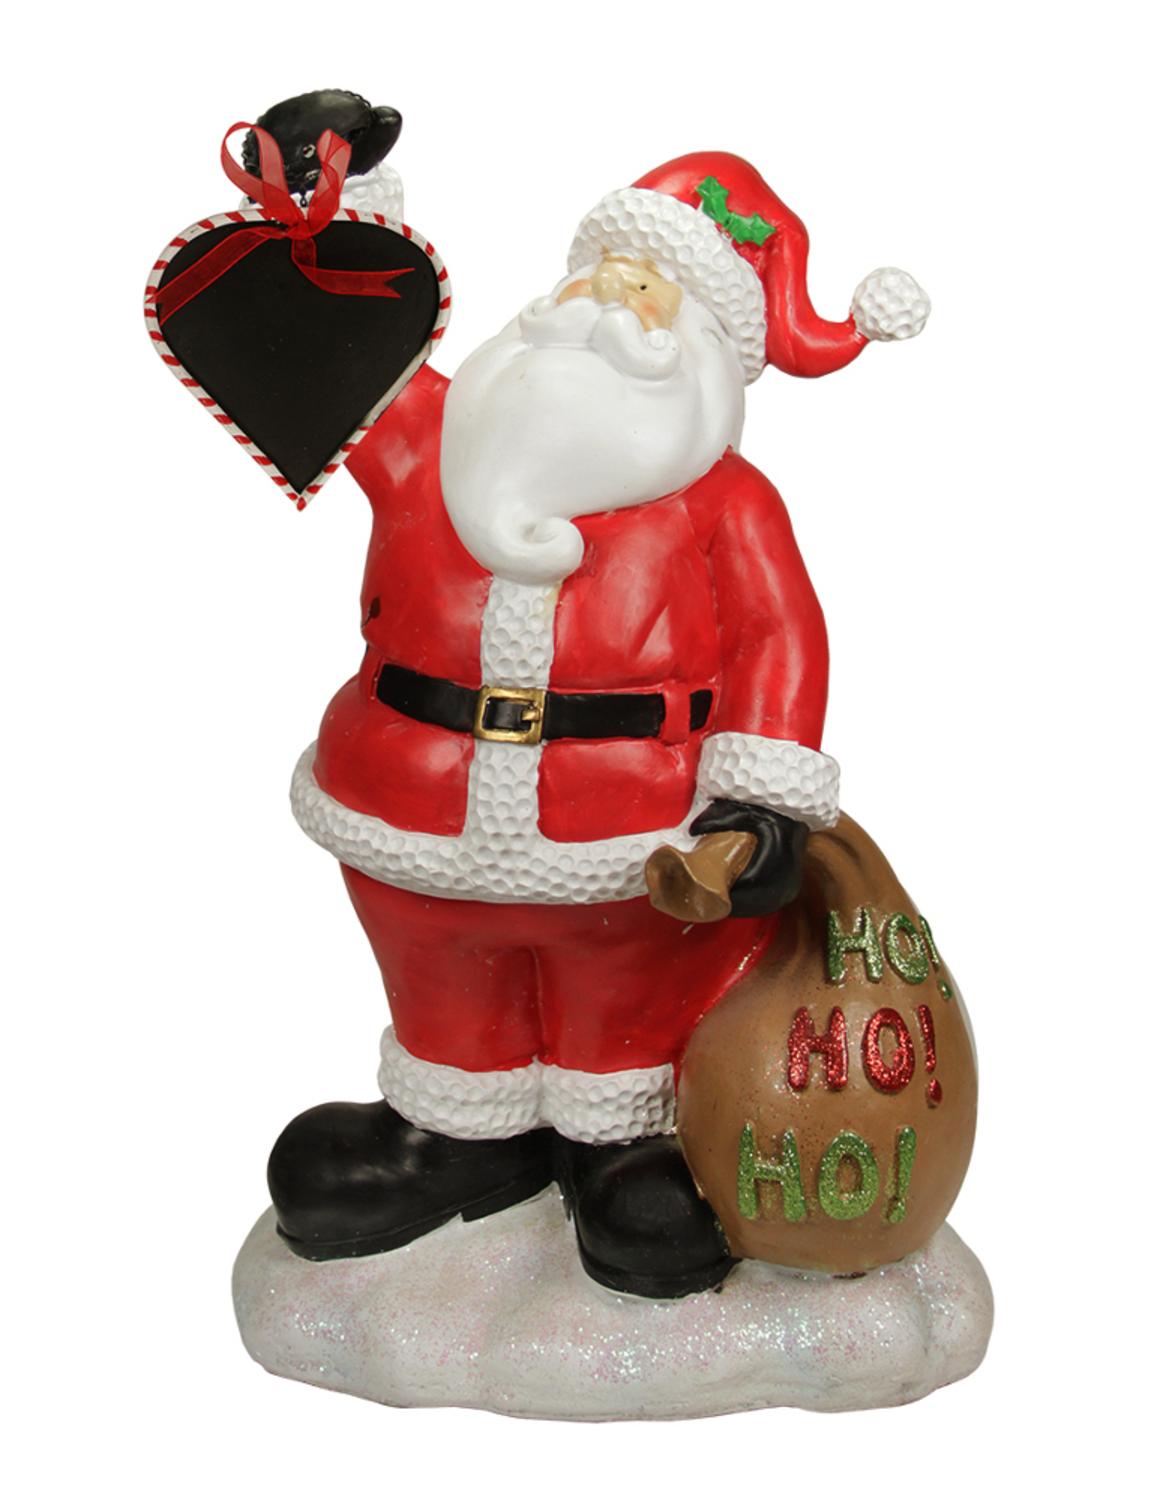 19" Festive Santa Claus Holding Toy Sack and Blackboard Christmas Countdown Statue